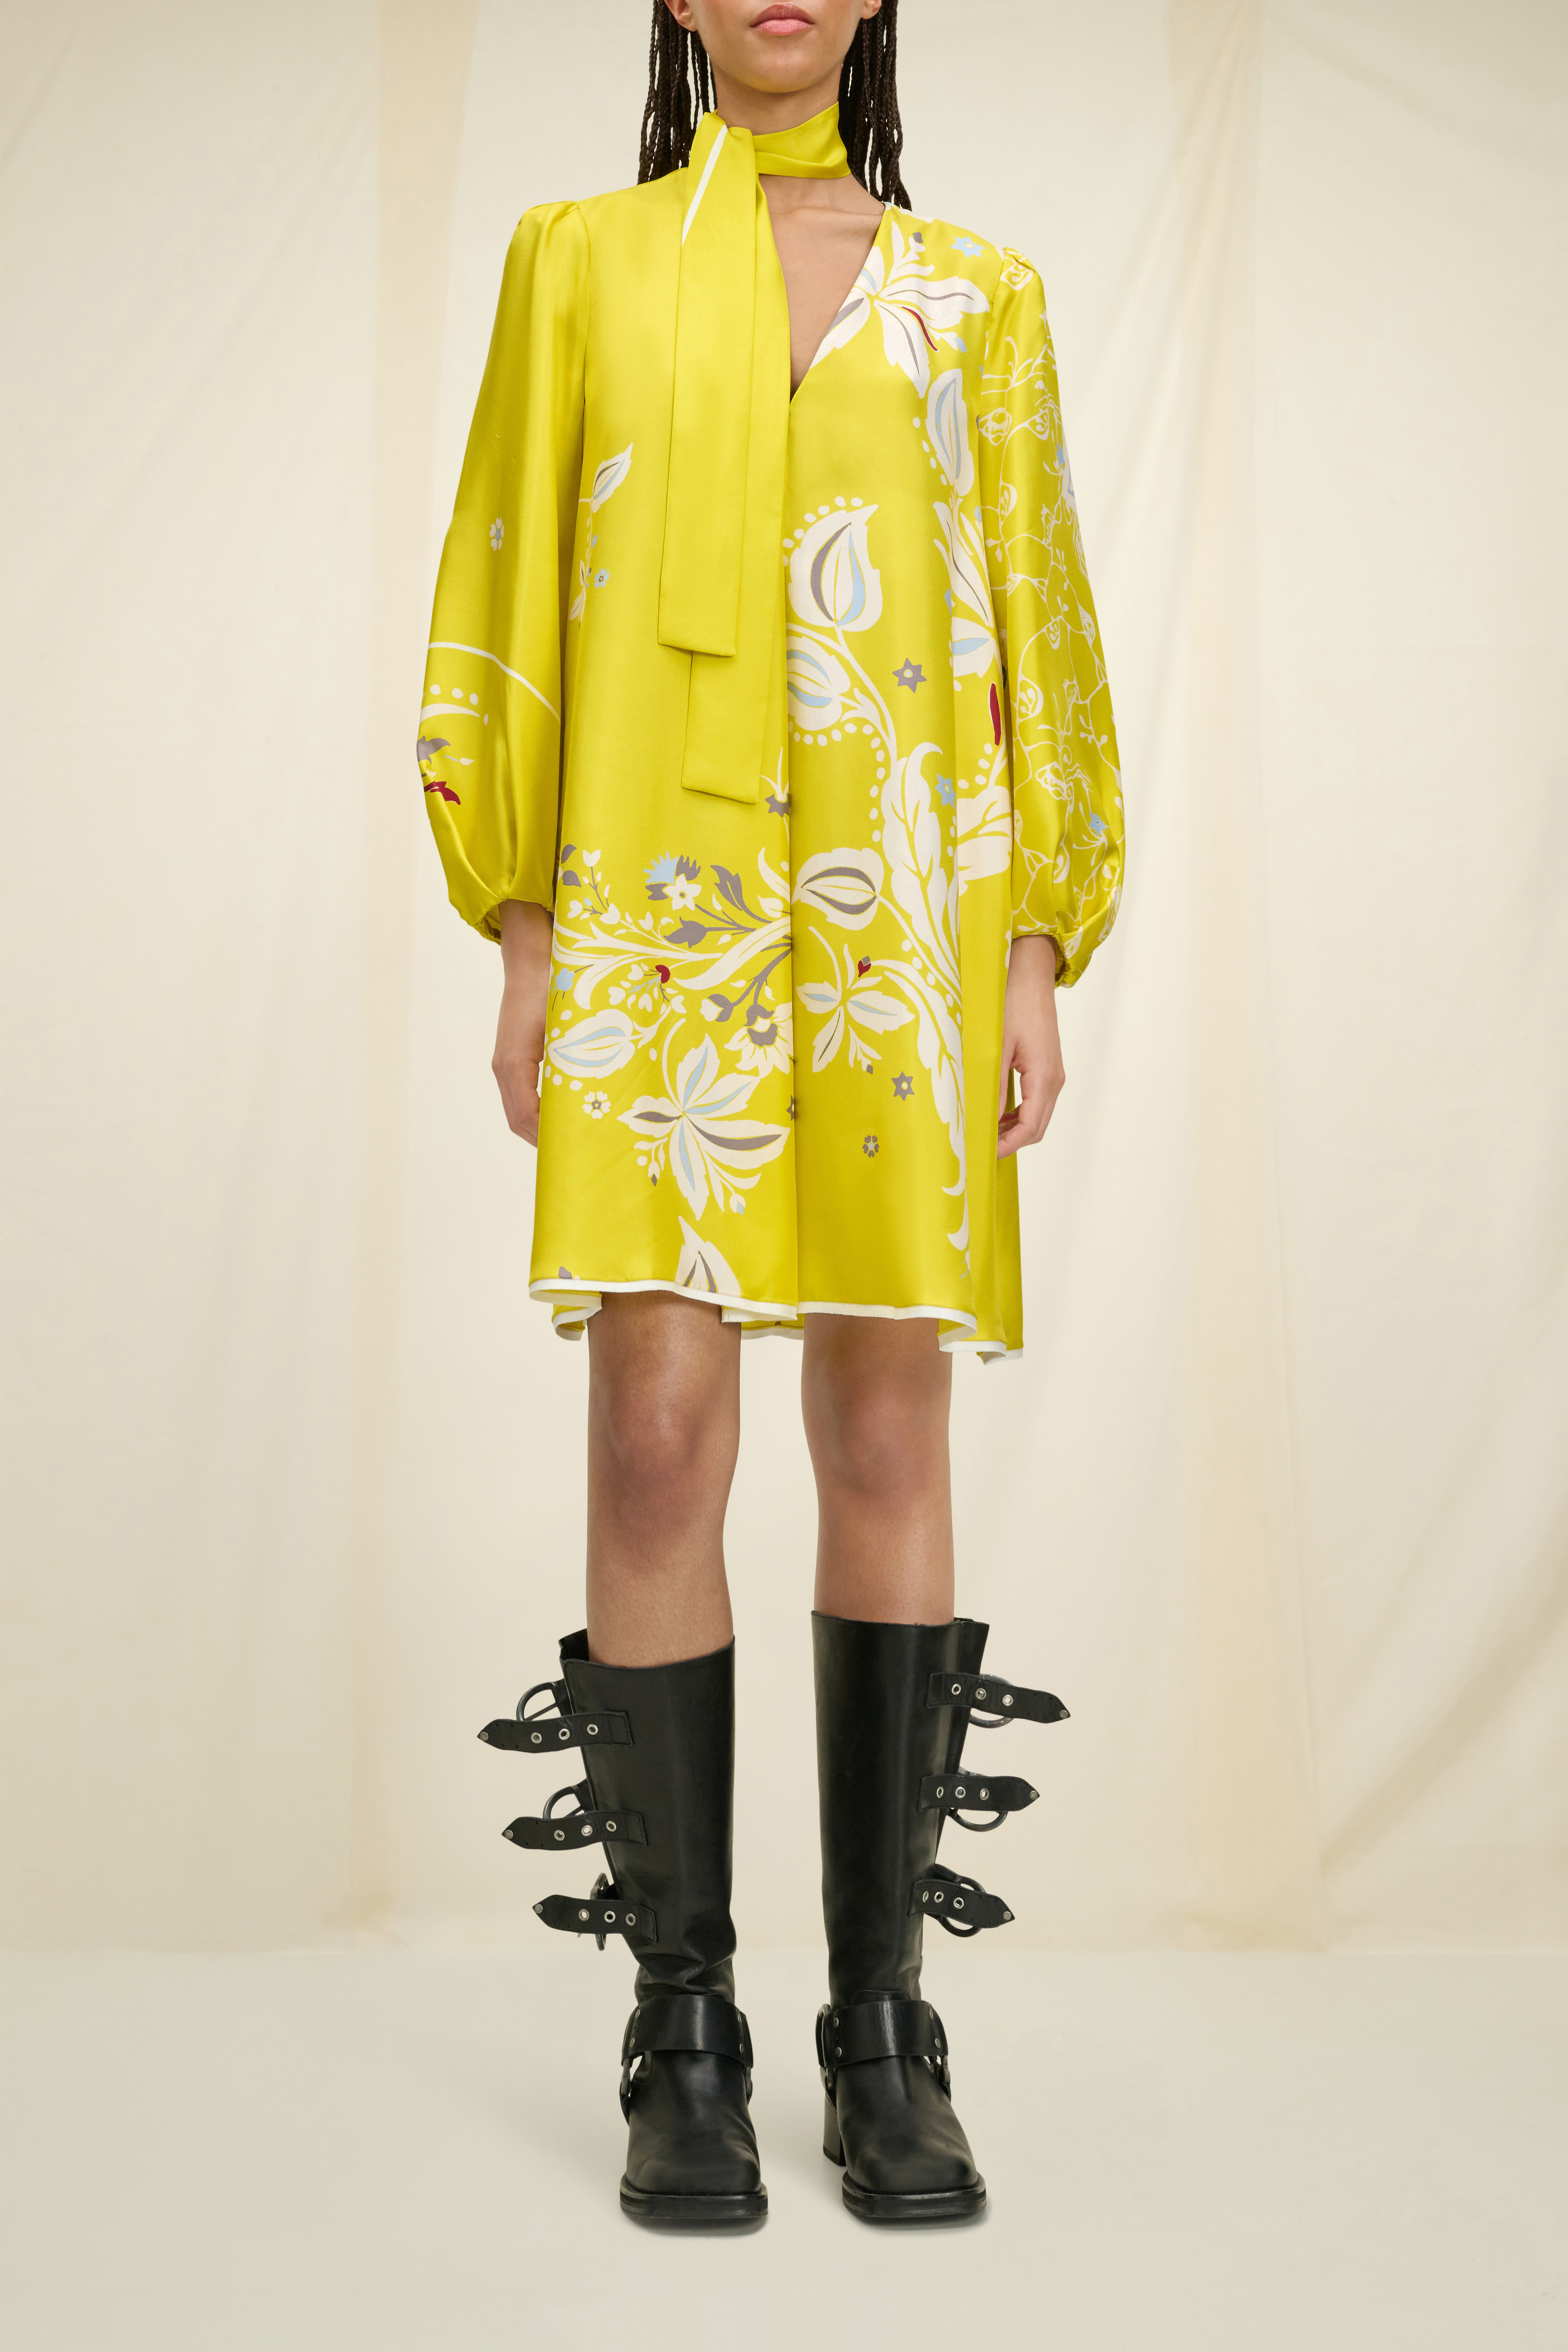 Dorothee Schumacher Floral dress with shawl